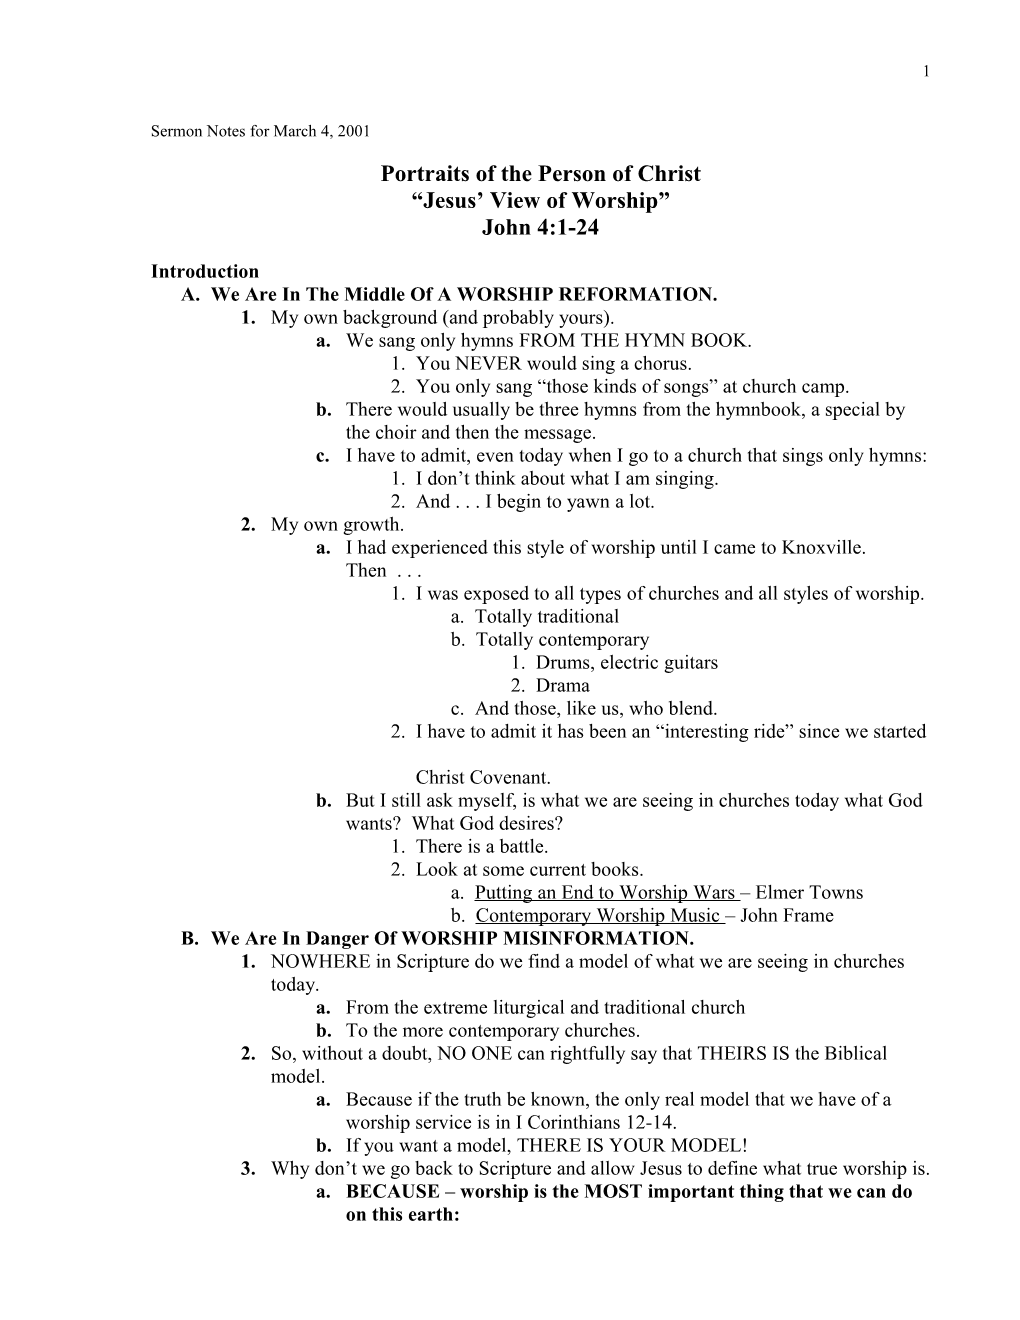 Sermon Notes for March 4, 2001